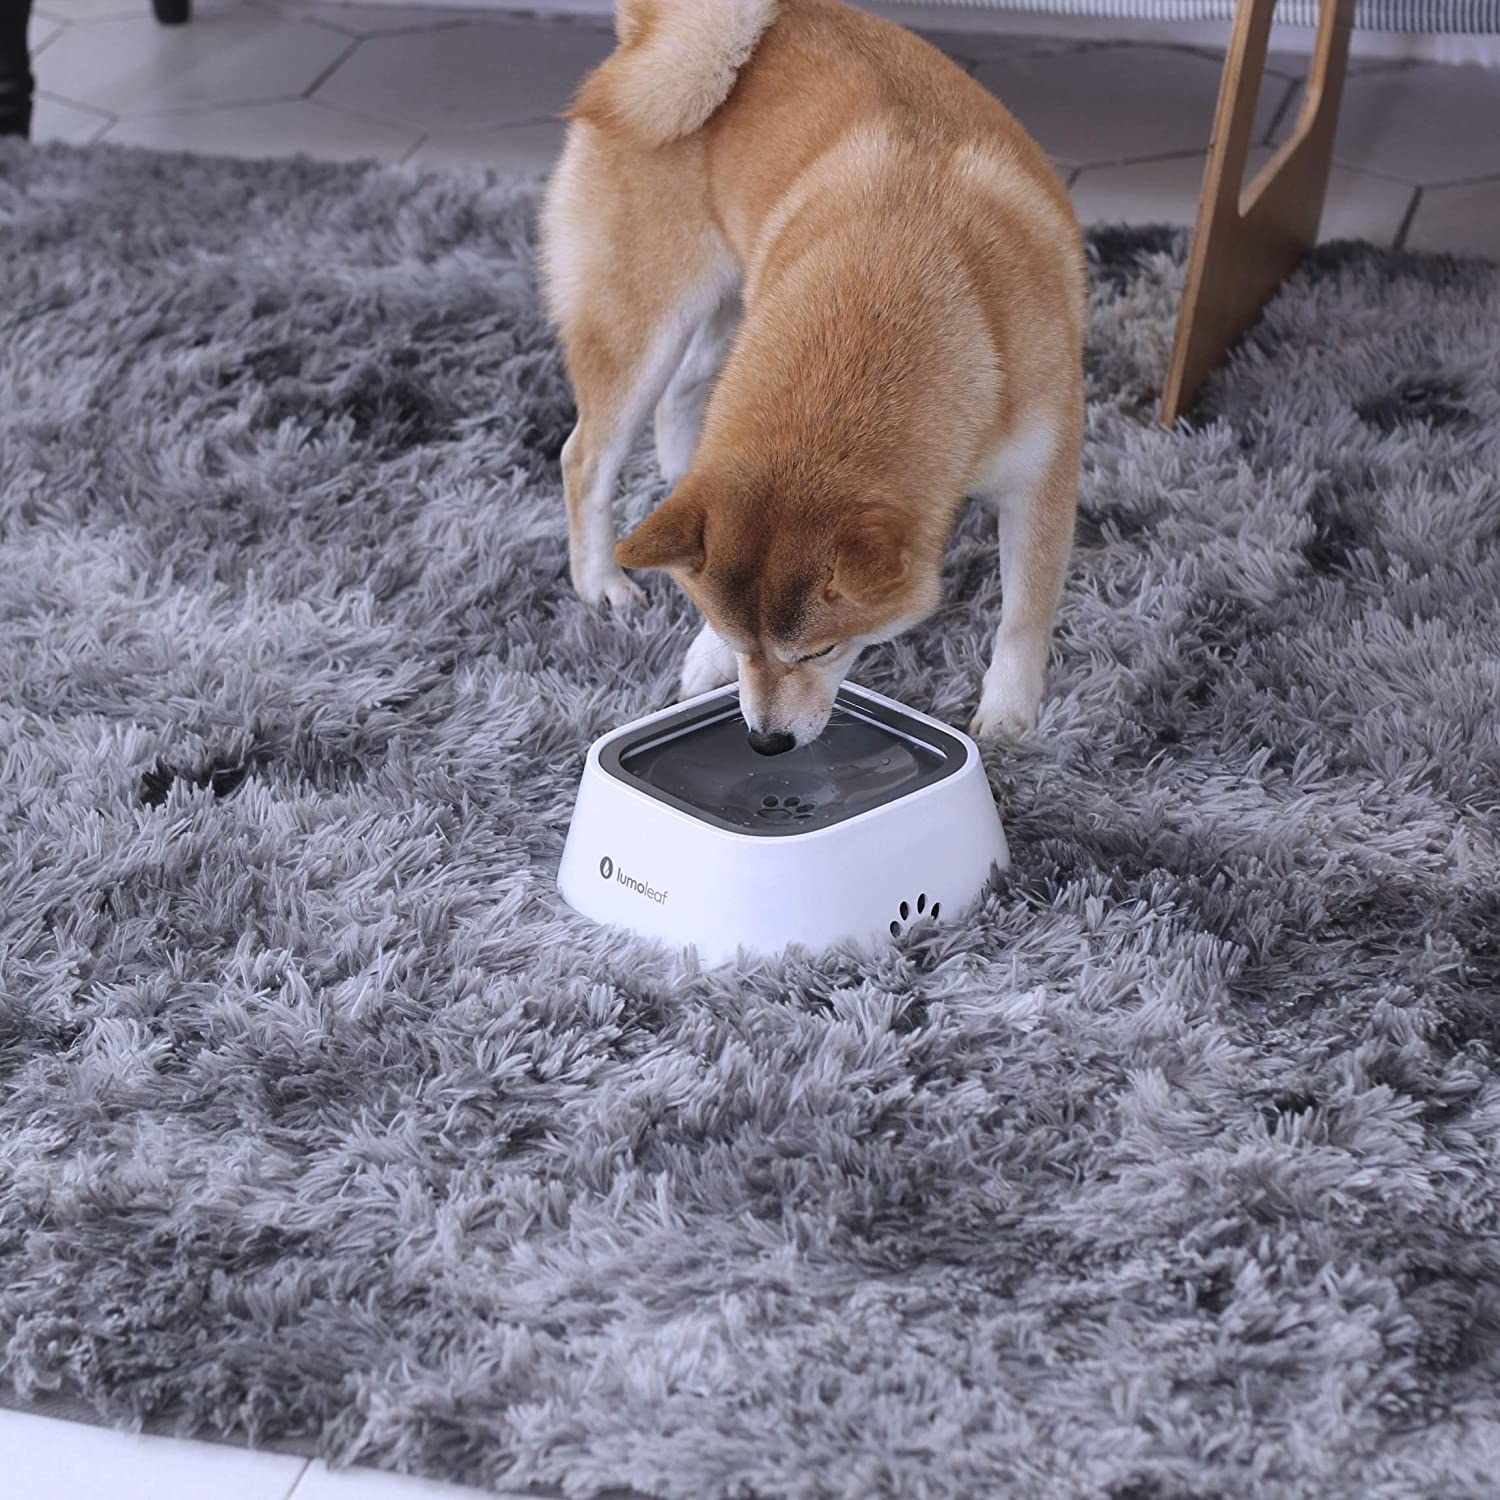 Dog drinking from the no-spill bowl 